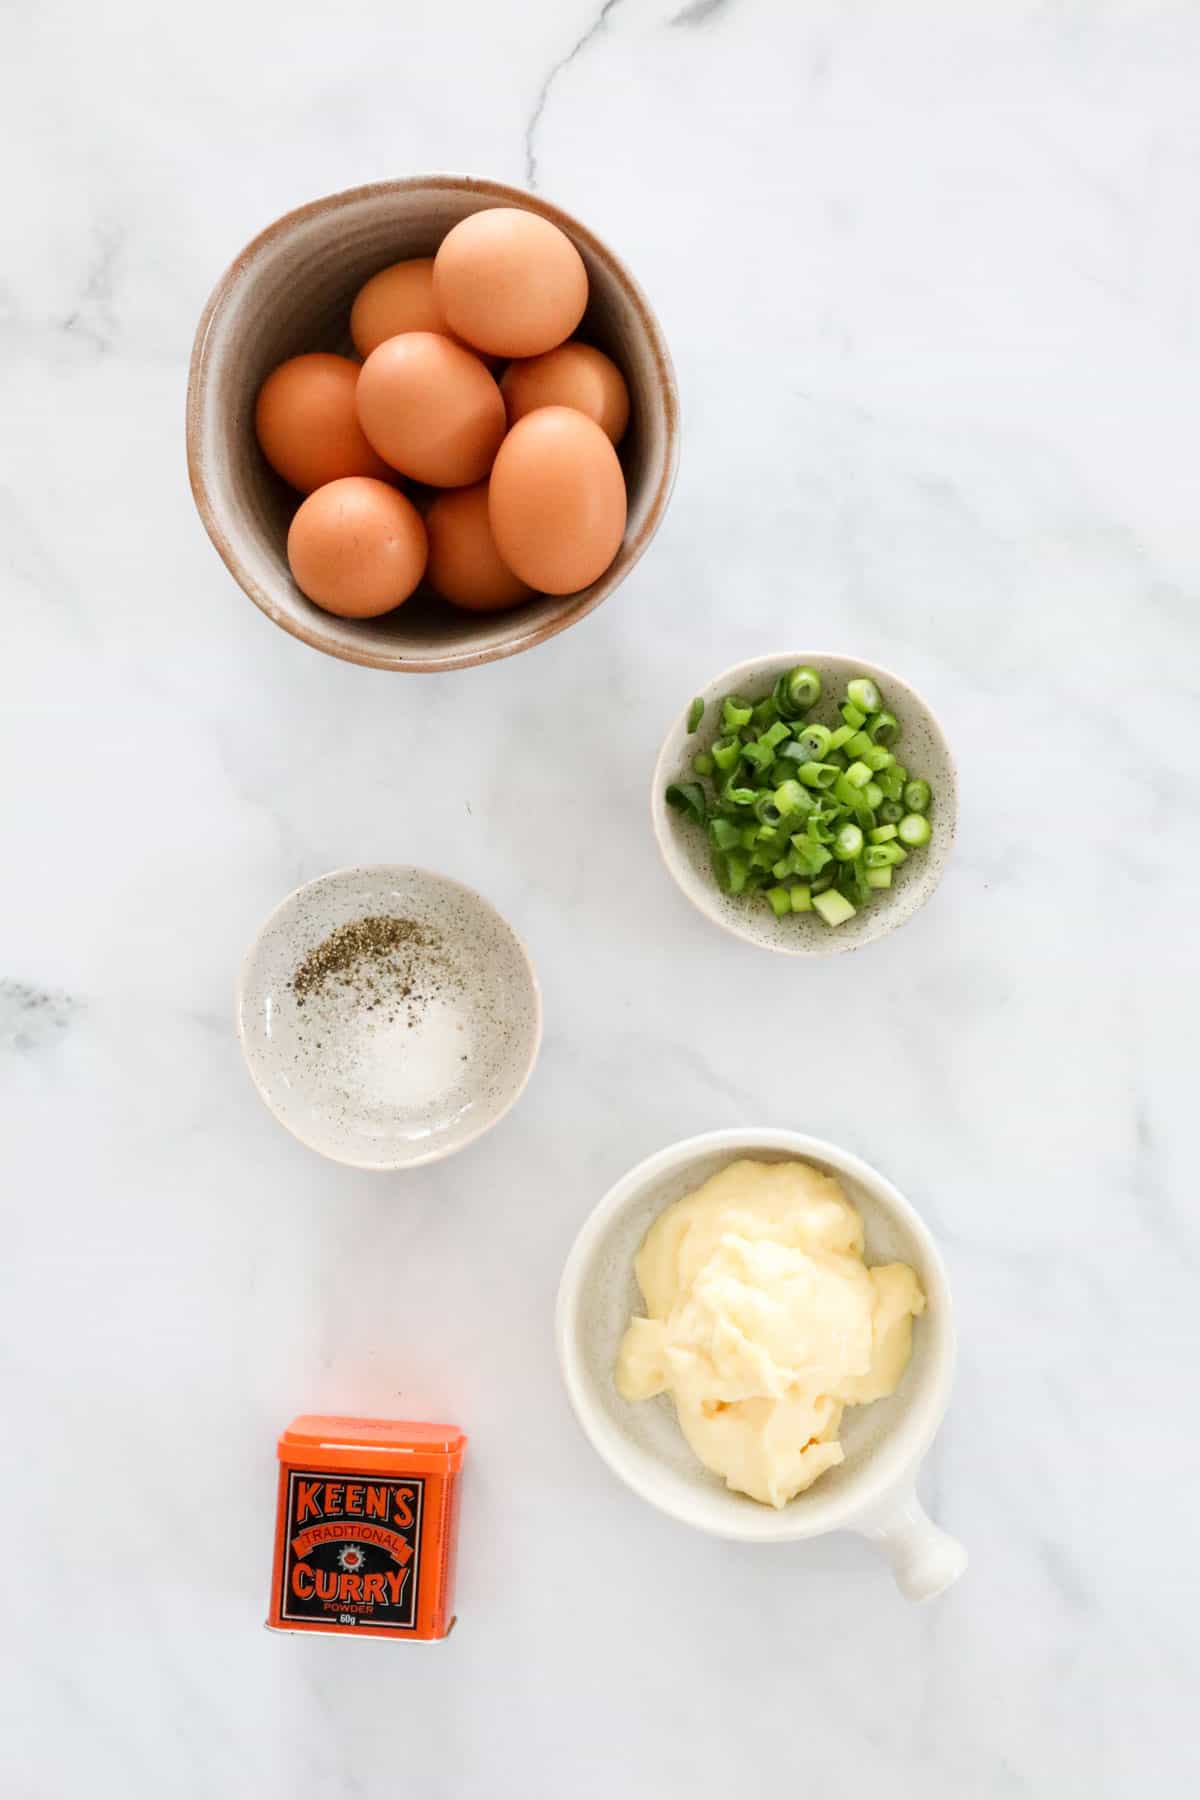 Ingredients laid out on a benchtop.